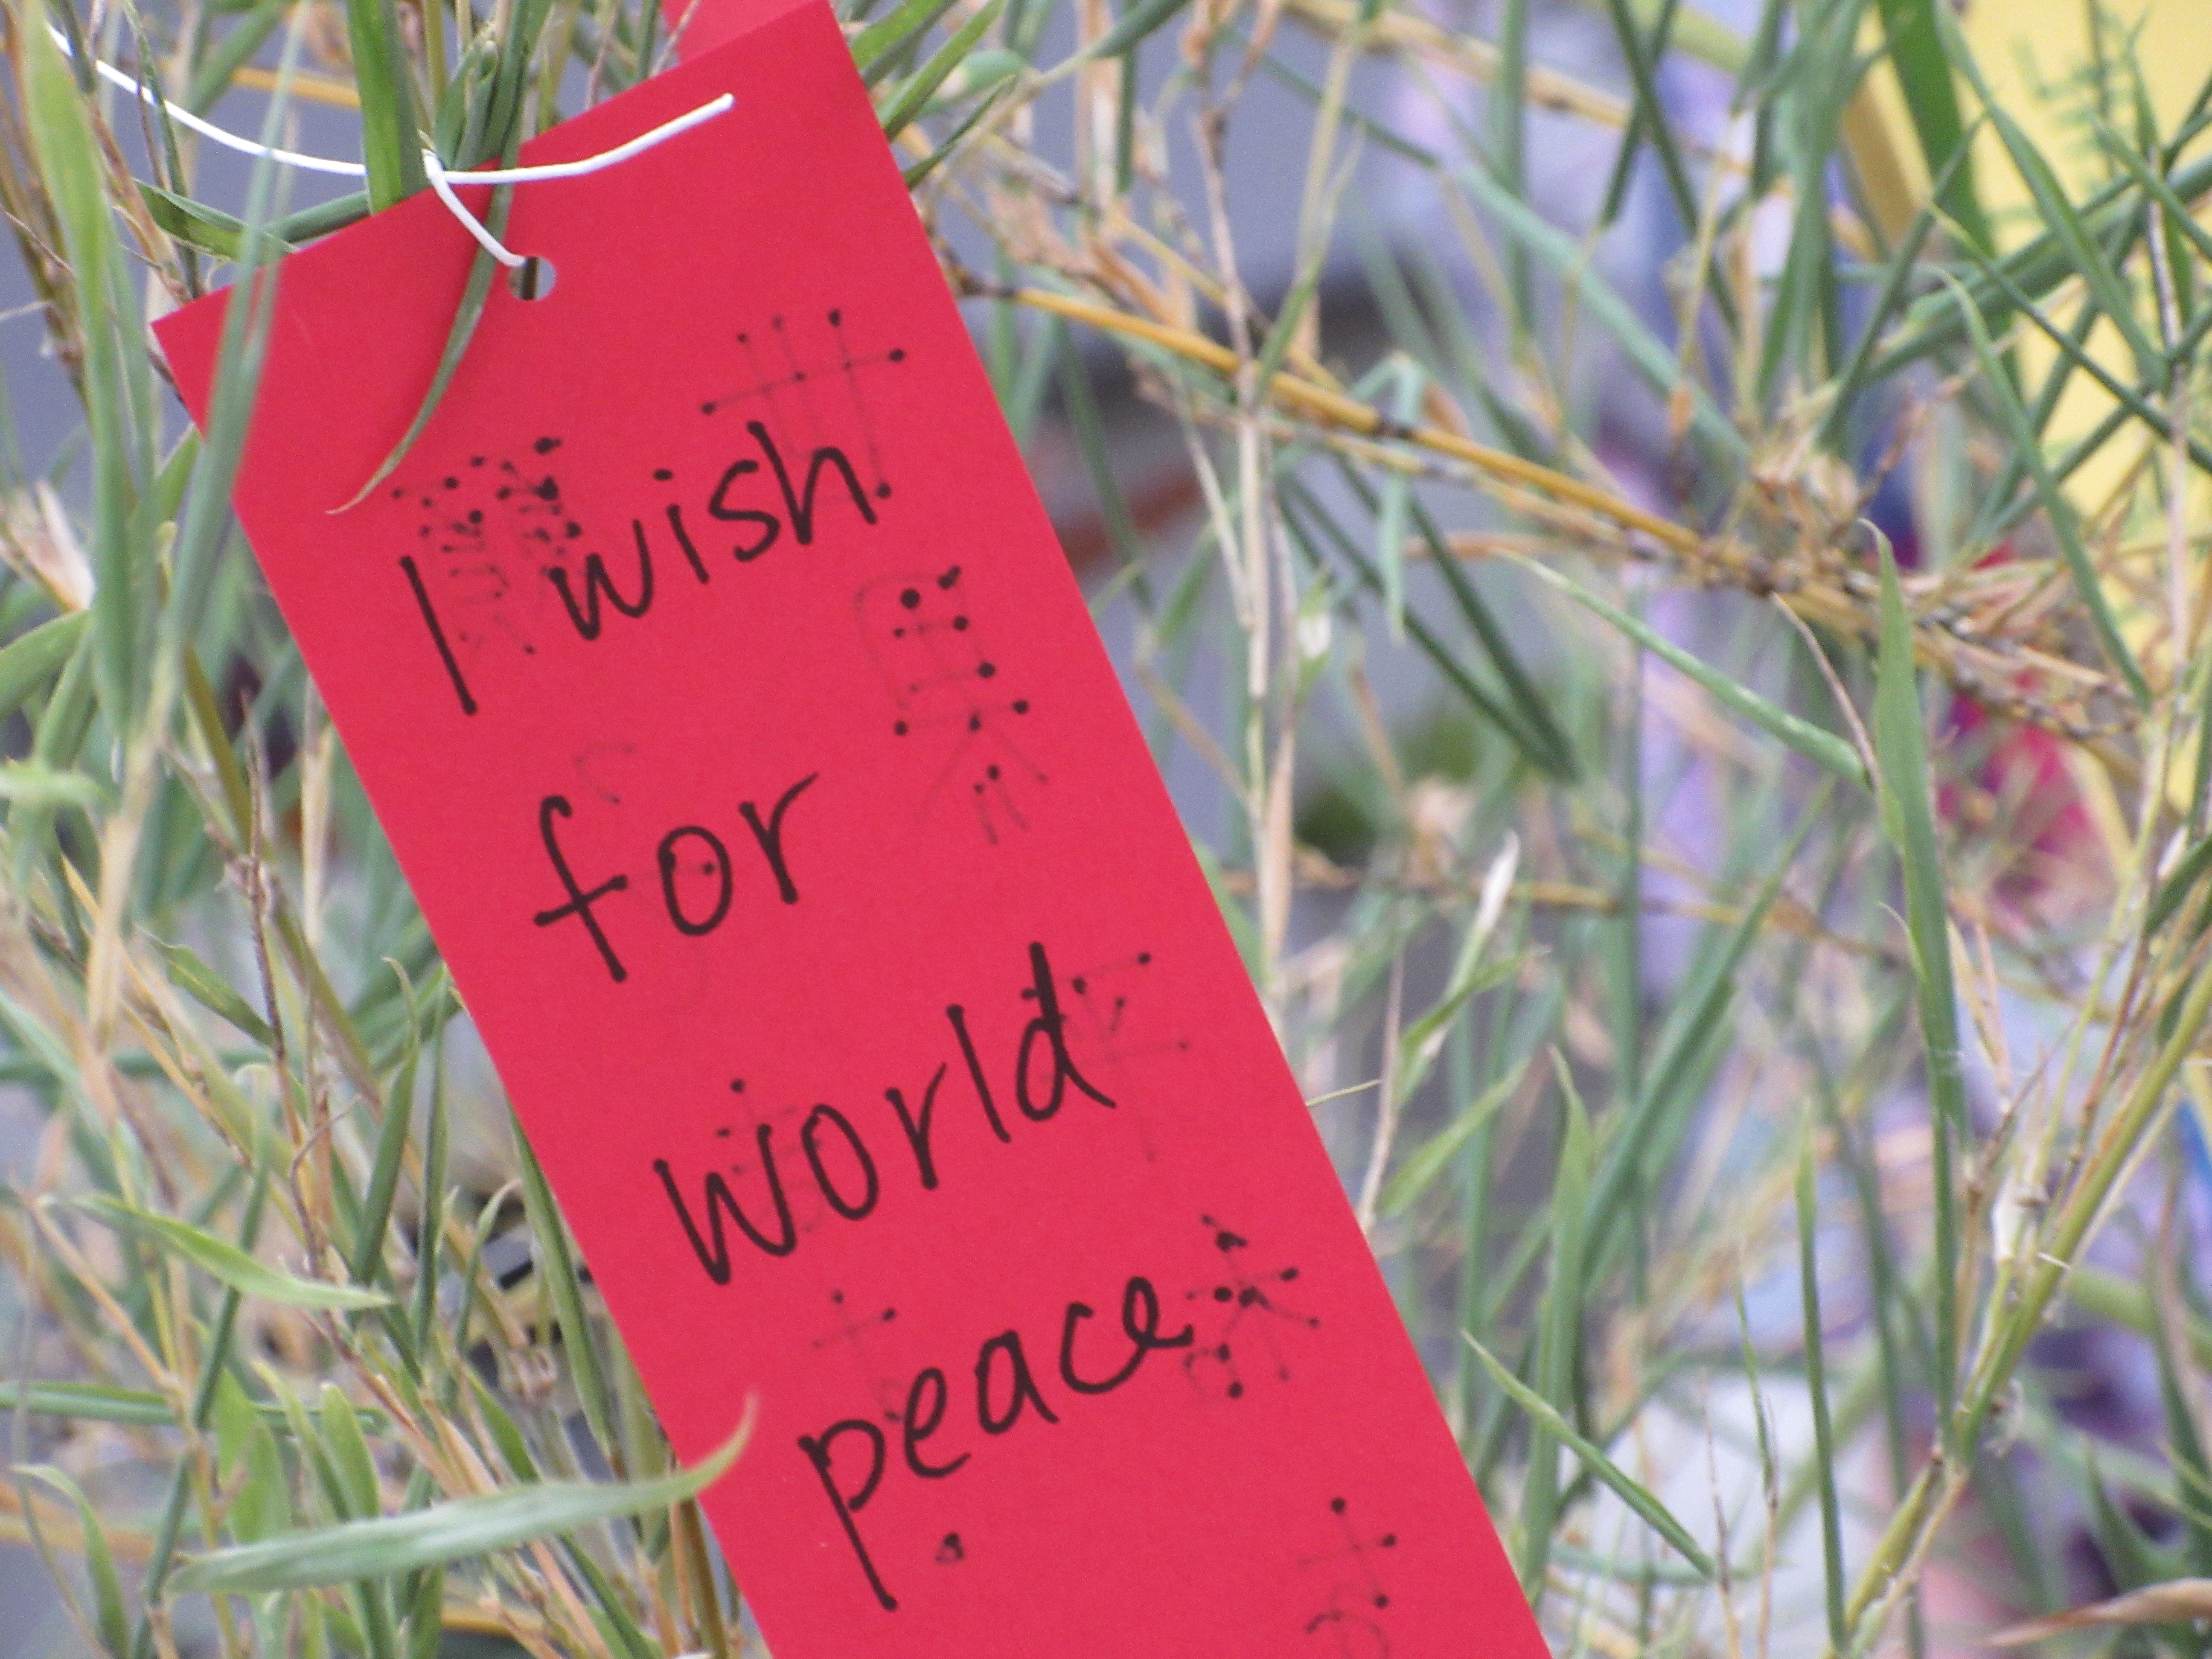 "I wish for world peace" written on paper hanging from bamboo branch.